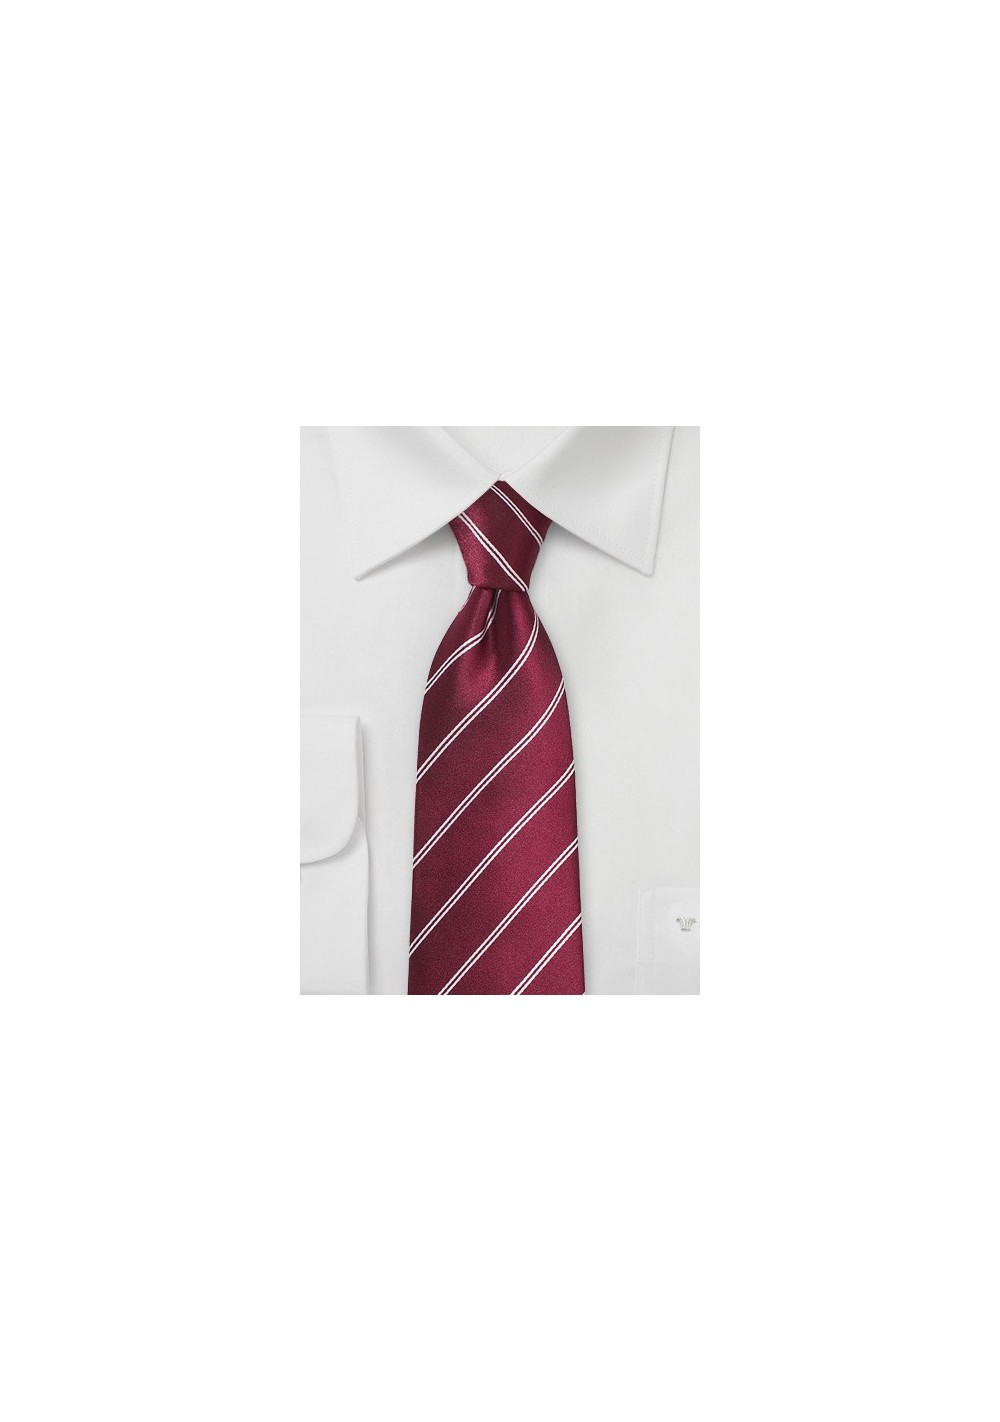 Burgundy Tie with Double Pin Stripes